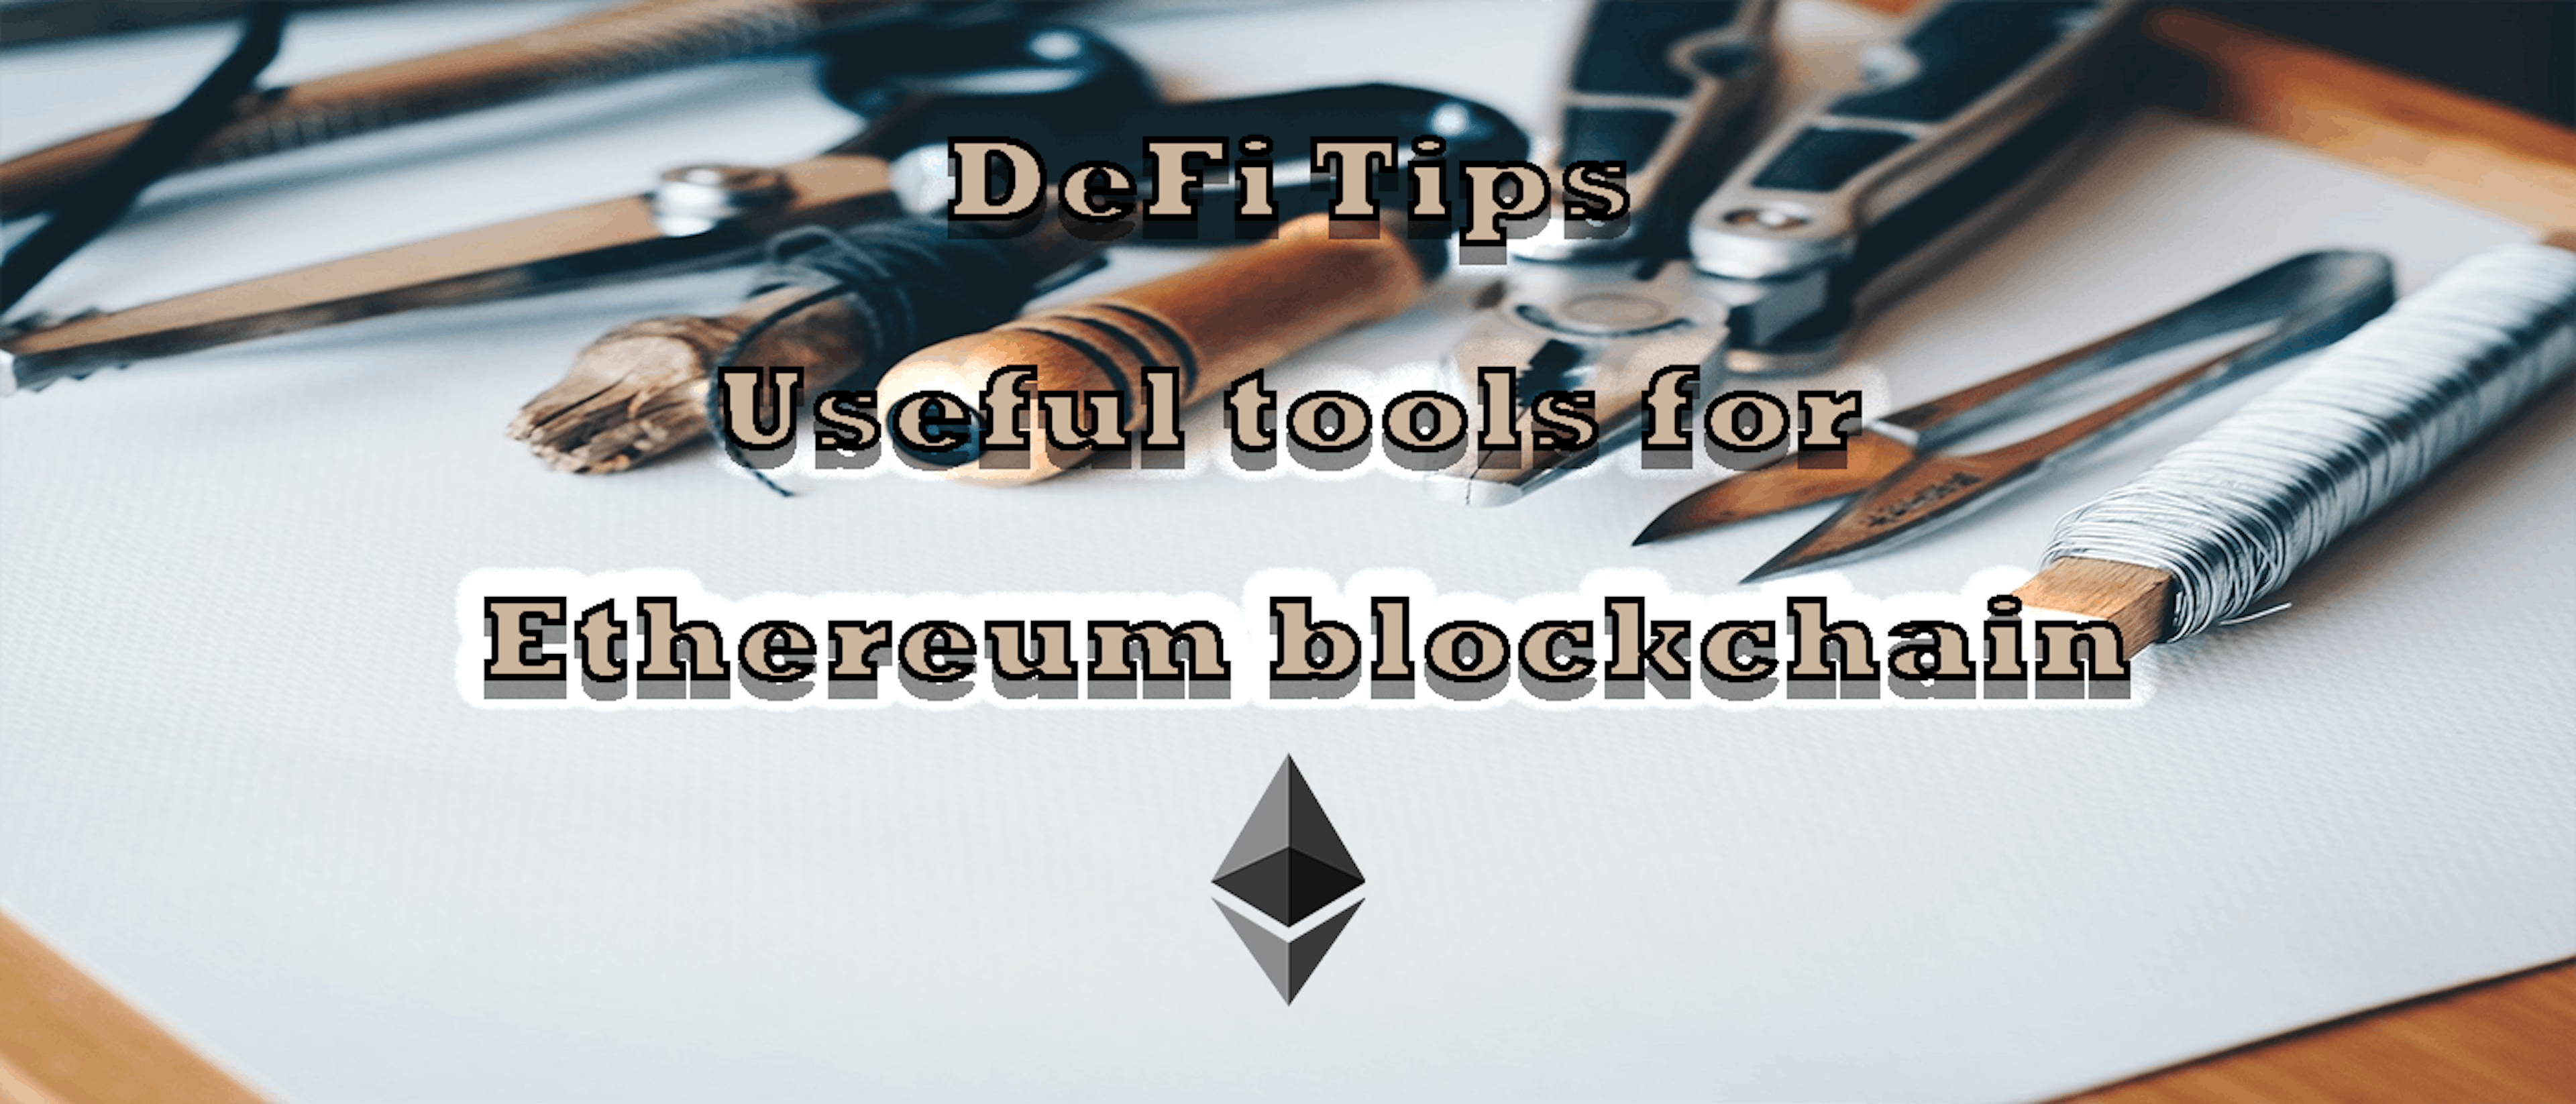 featured image - DeFi Tips - Useful tools for Ethereum blockchain